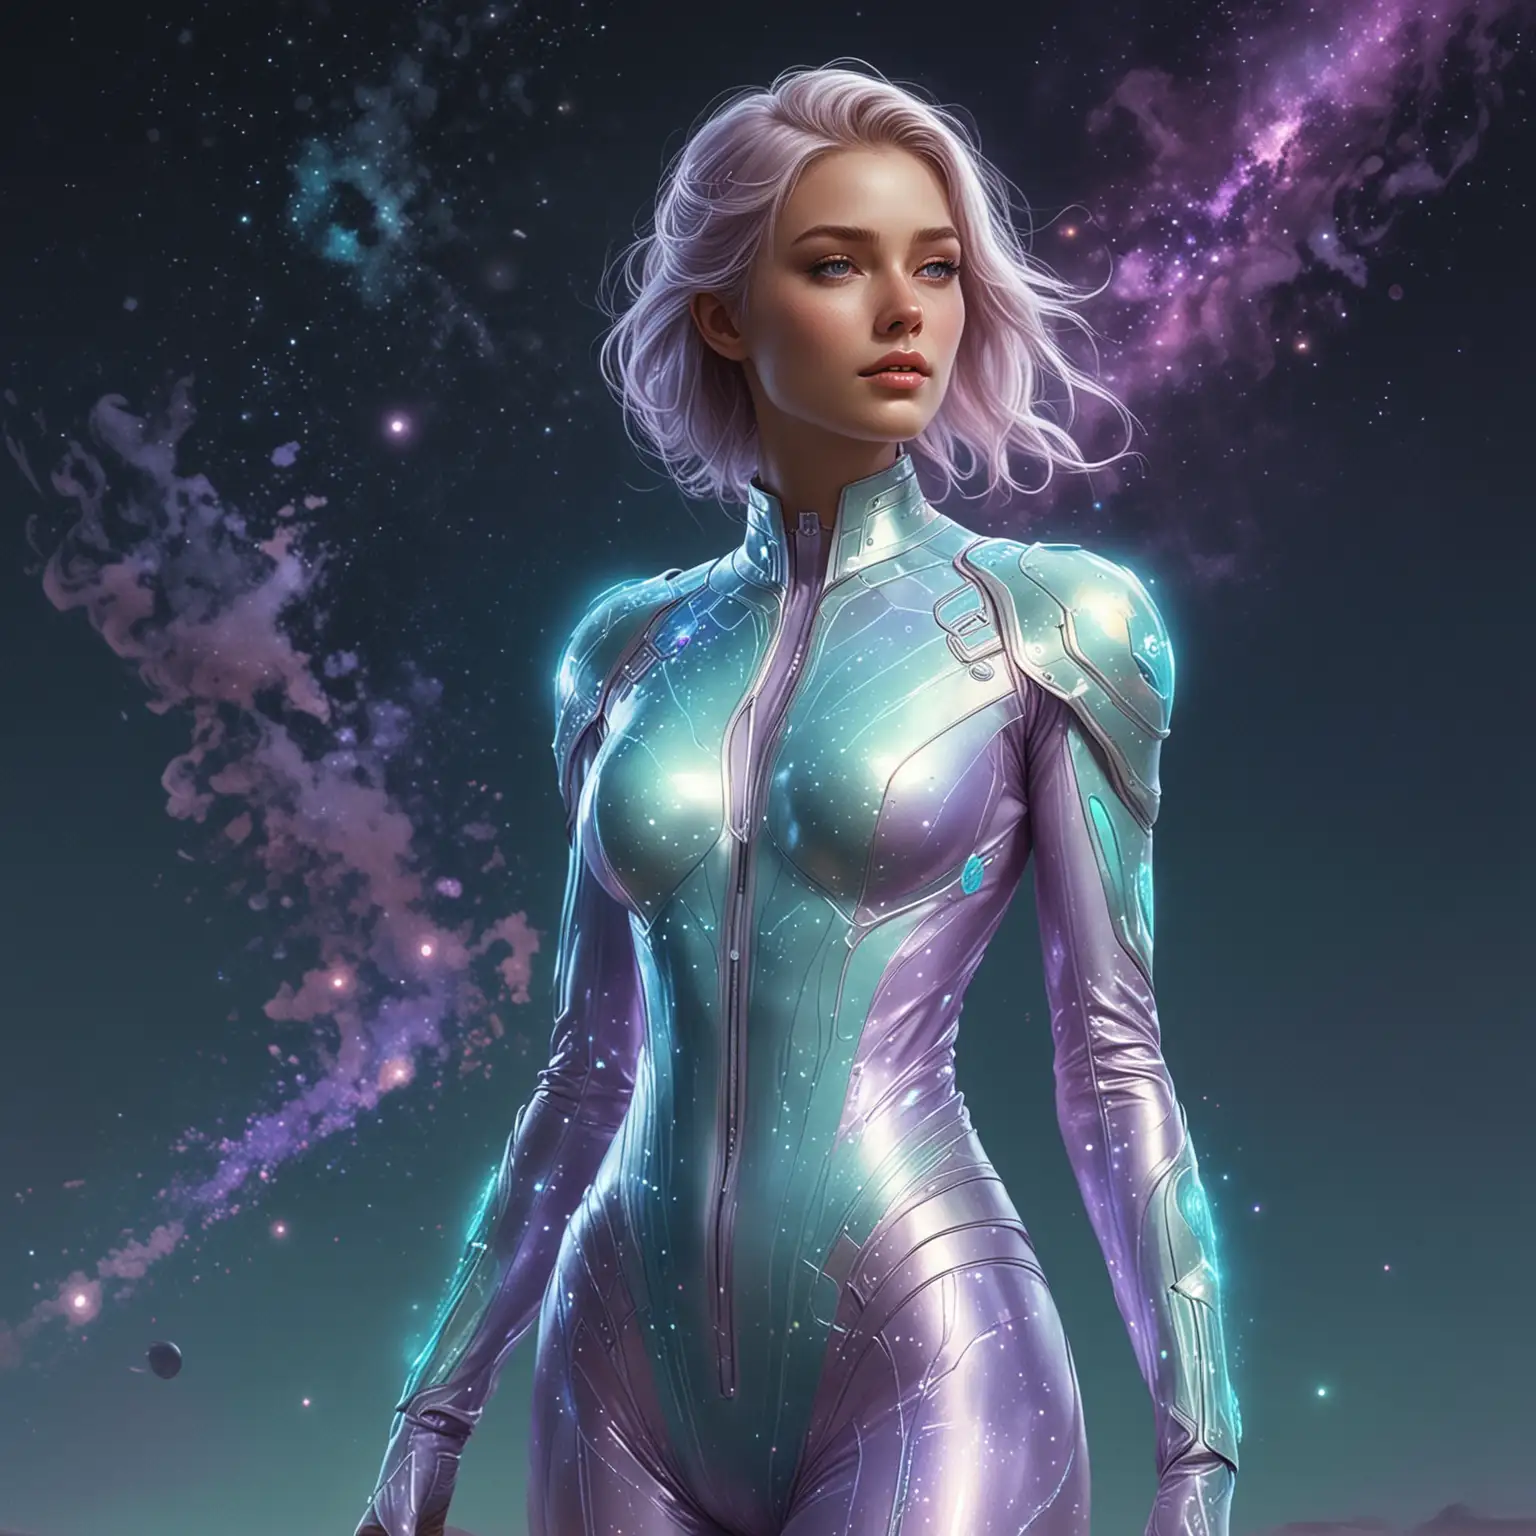 A mesmerizing interplanetary ambassador, her bioluminescent skin exudes an ethereal glow, shimmering with shades of pale turquoise and soft lavender. Standing tall and regal, she wears a sleek, form-fitting suit that seems to shimmer and shift with the colors of the cosmos. This concept art is a stunning digital painting, showcasing intricate details and a seamless blend of realism and fantasy. The image captivates viewers with its otherworldly beauty and sophisticated design, evoking a sense of wonder and intrigue.